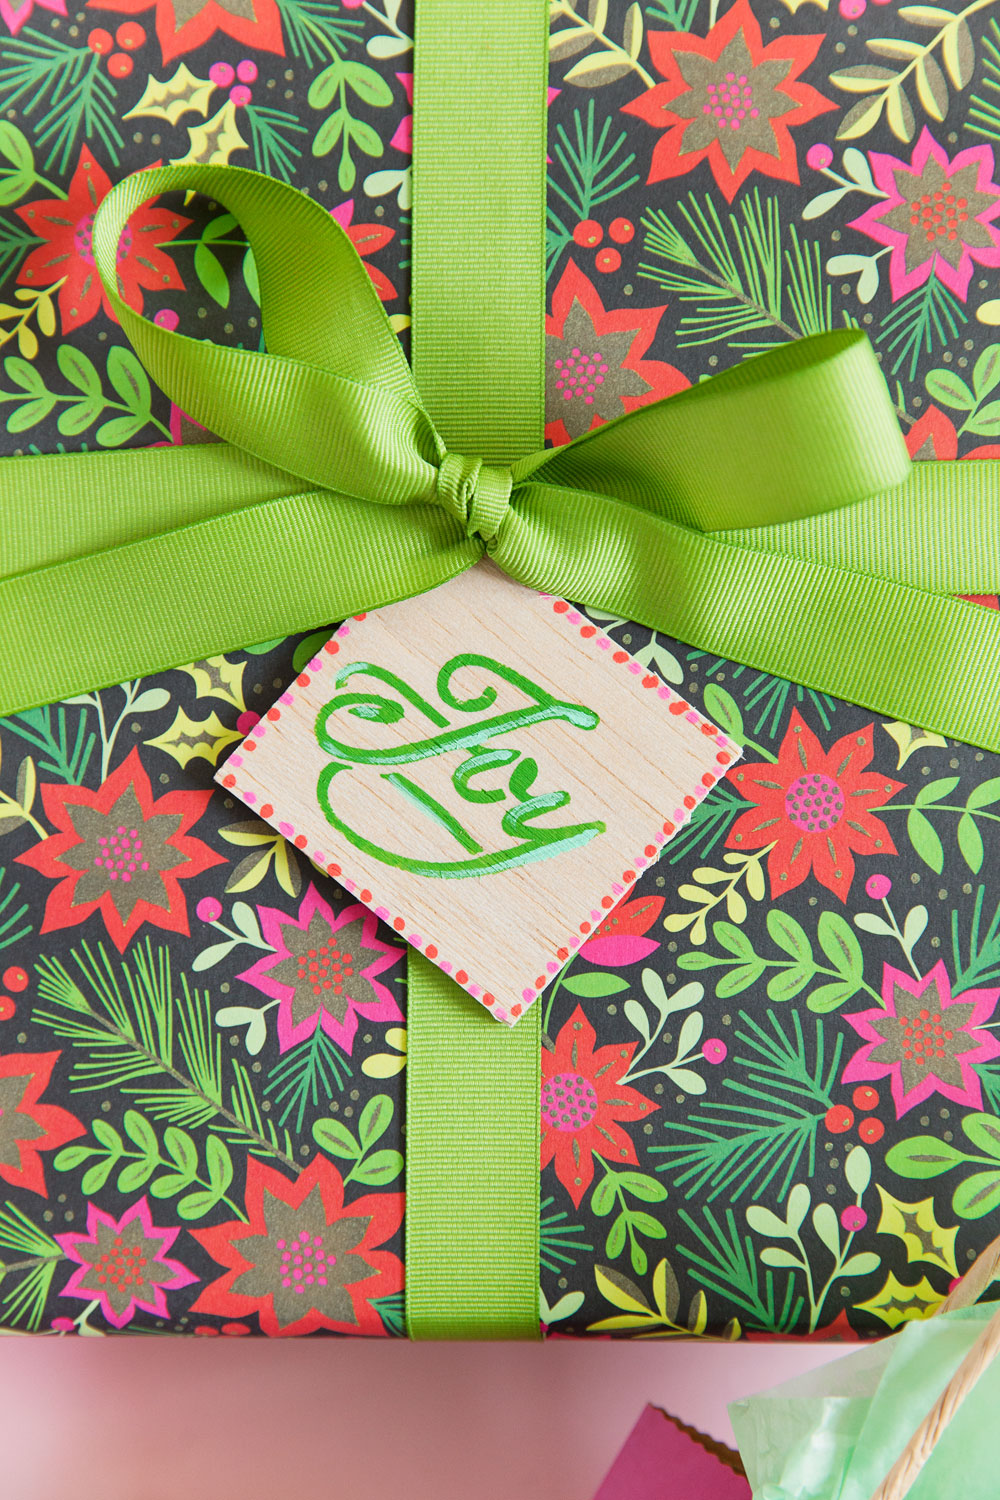 Learn how to make these simple and fun DIY Christmas gift tags